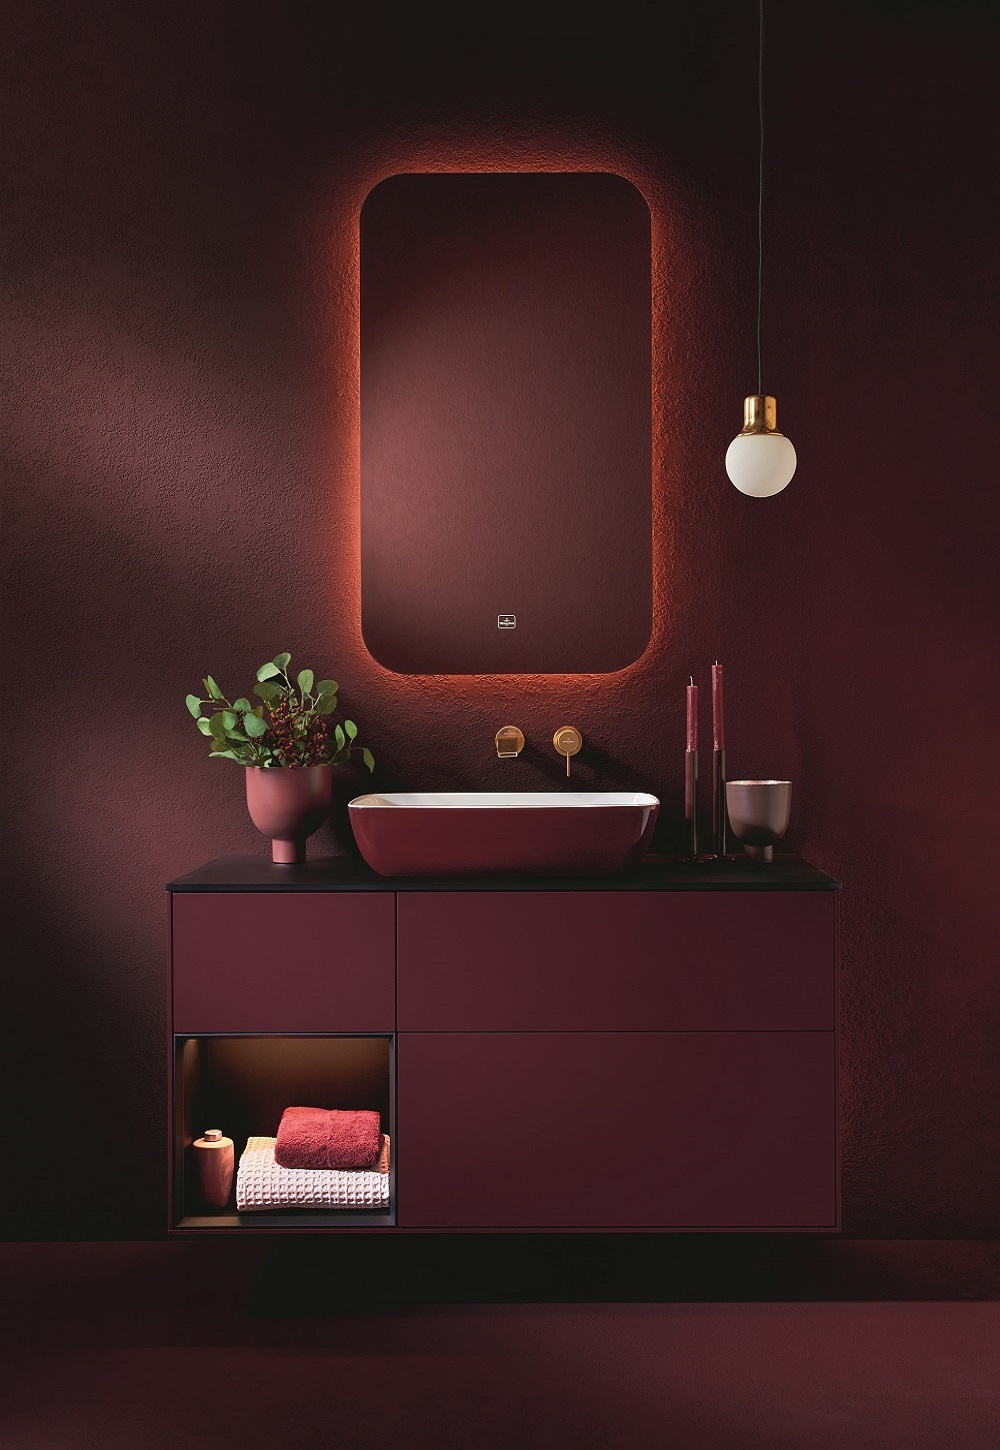 the artis range by villeroy & Boch with shades of red for the bathroom